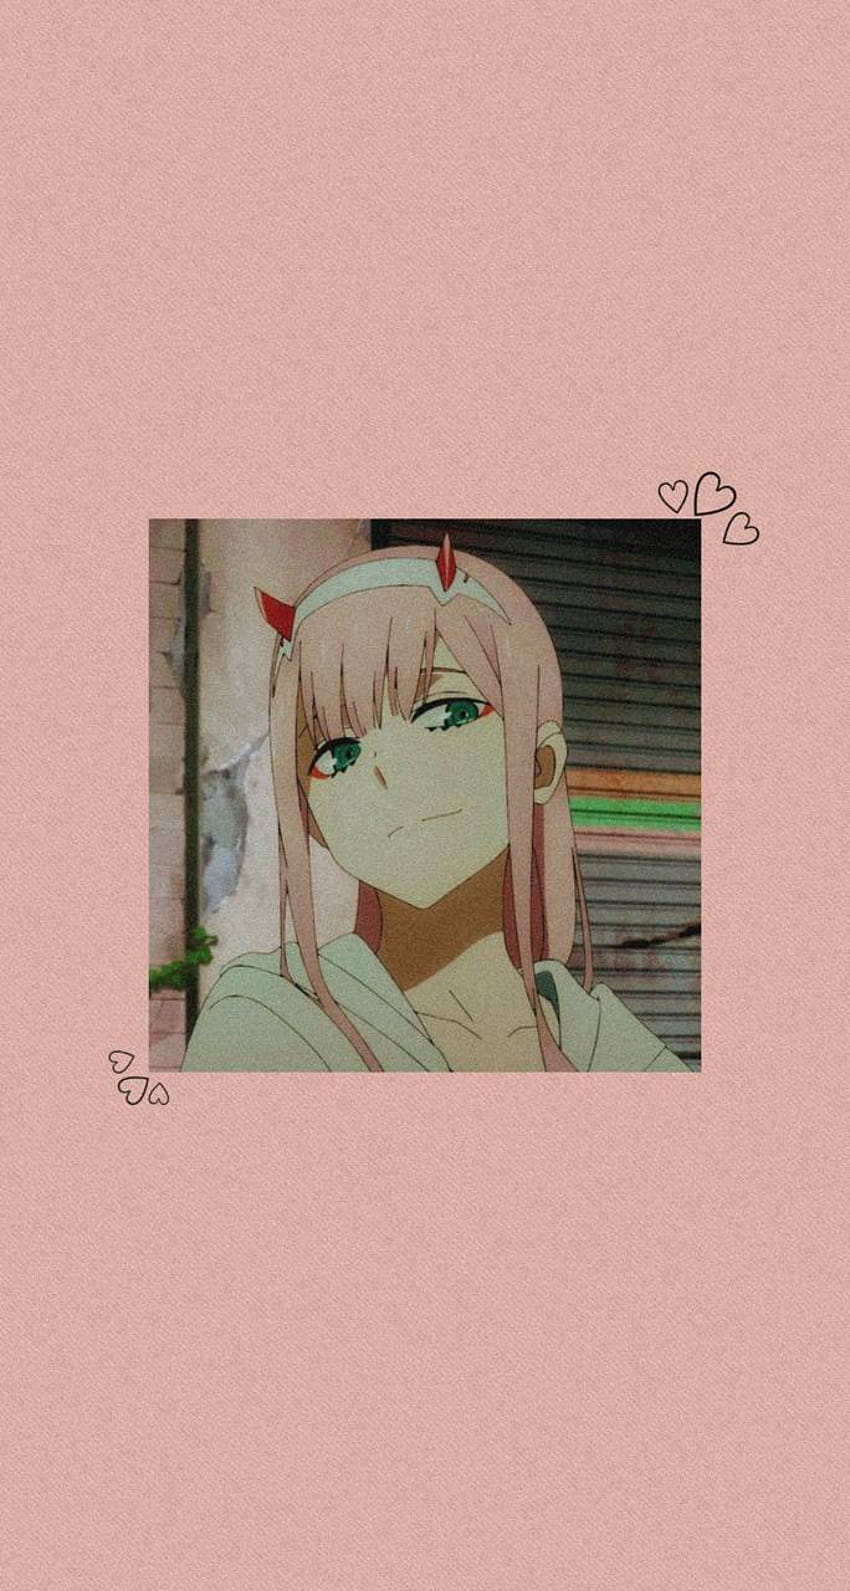 Pin on darling in the franxx